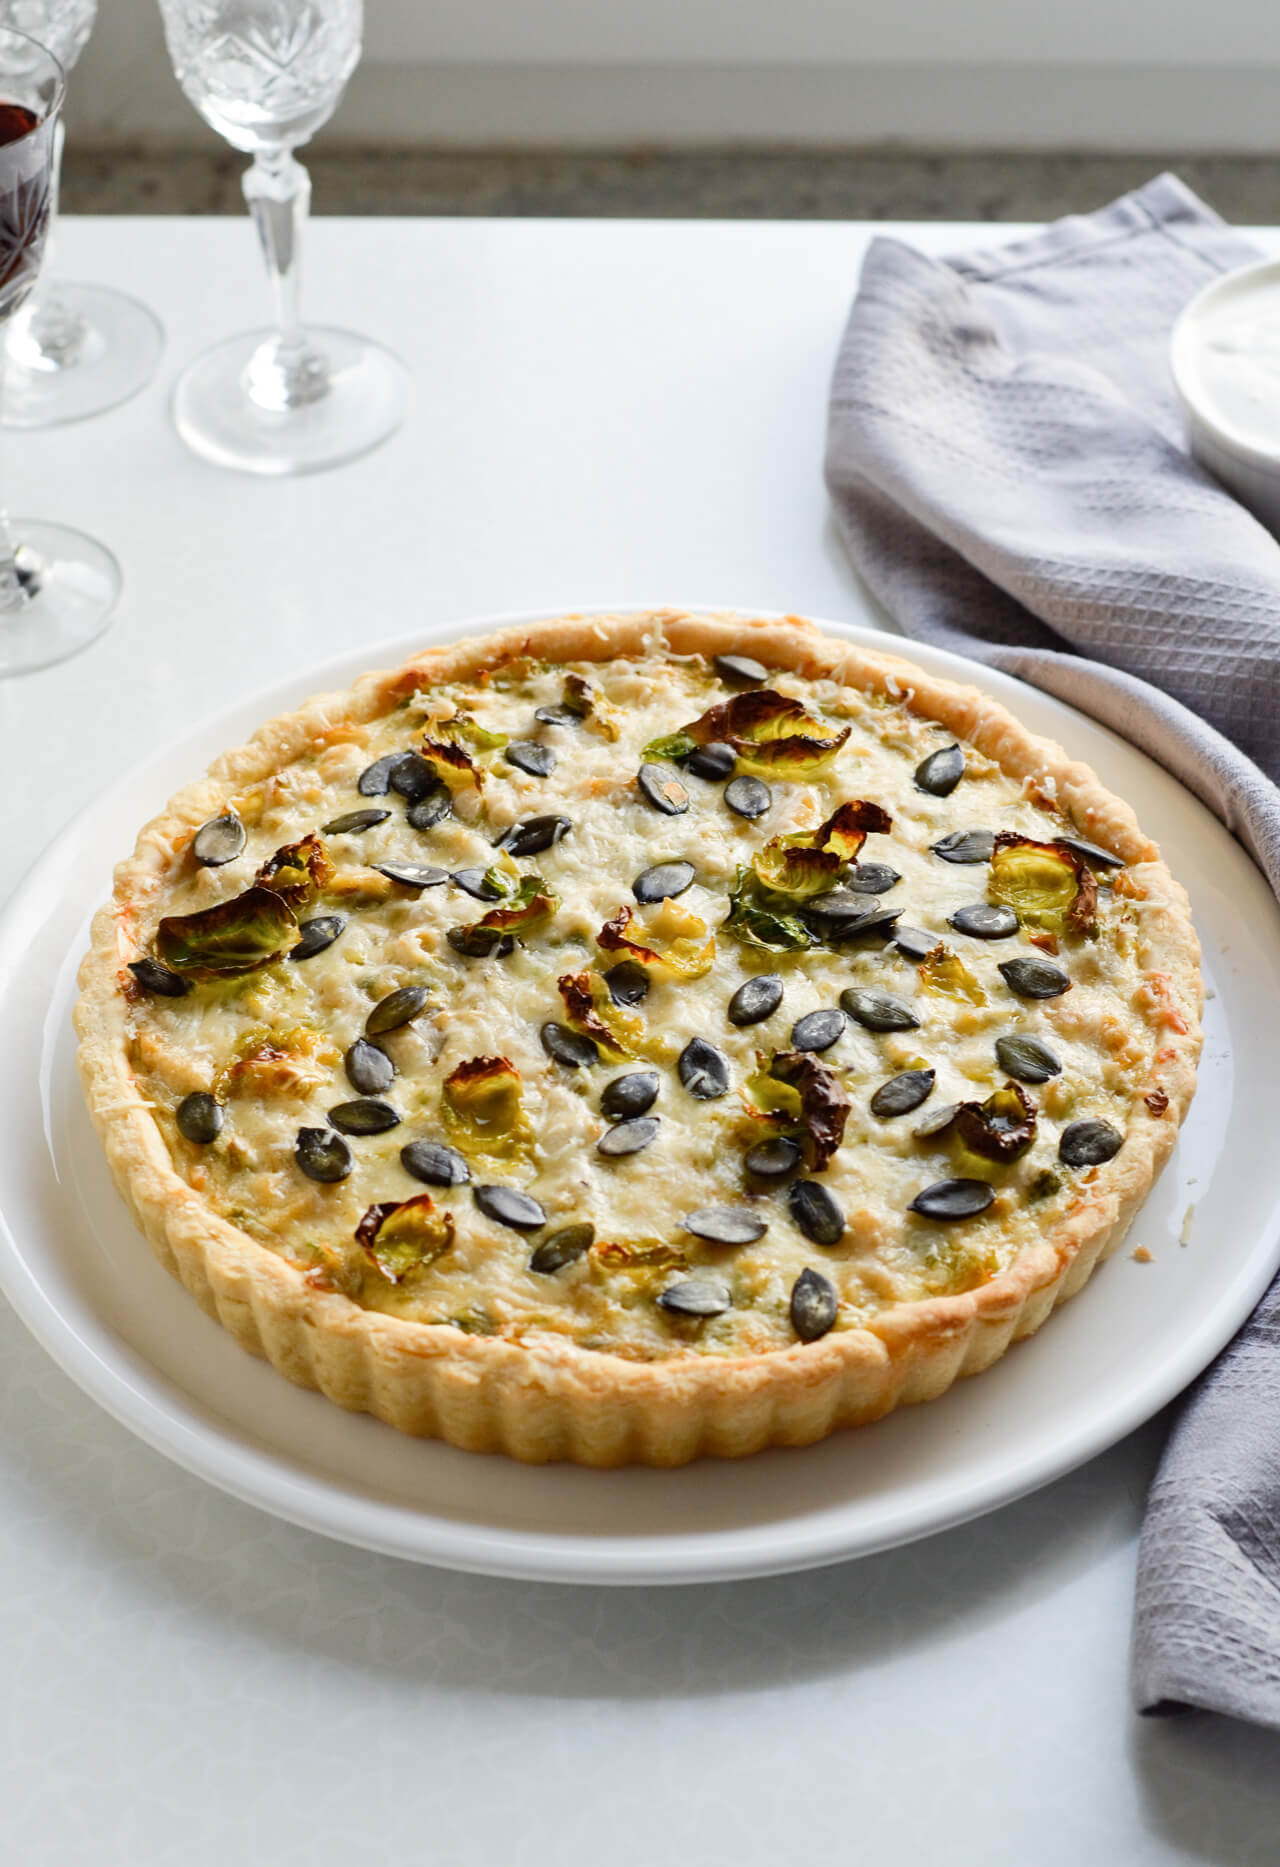 Leek brussels sprout quiche - a great vegetarian recipe to make for brunch or dinner.